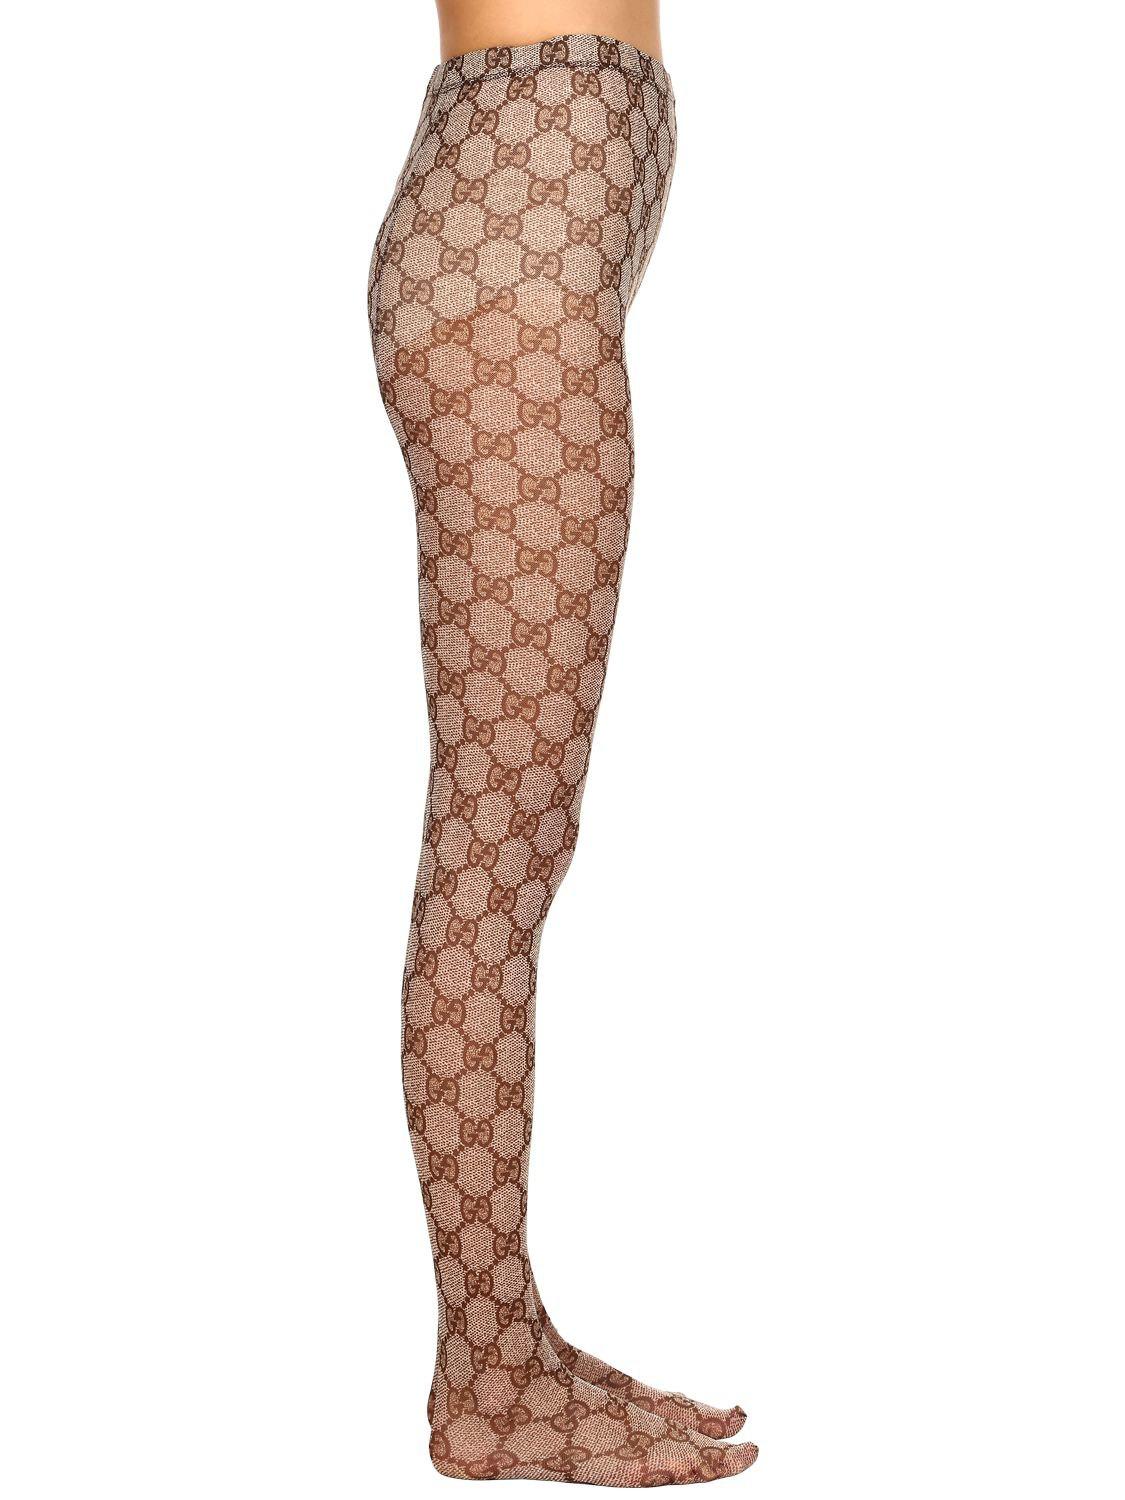 Gucci Gg Supreme Stockings in Brown - Lyst